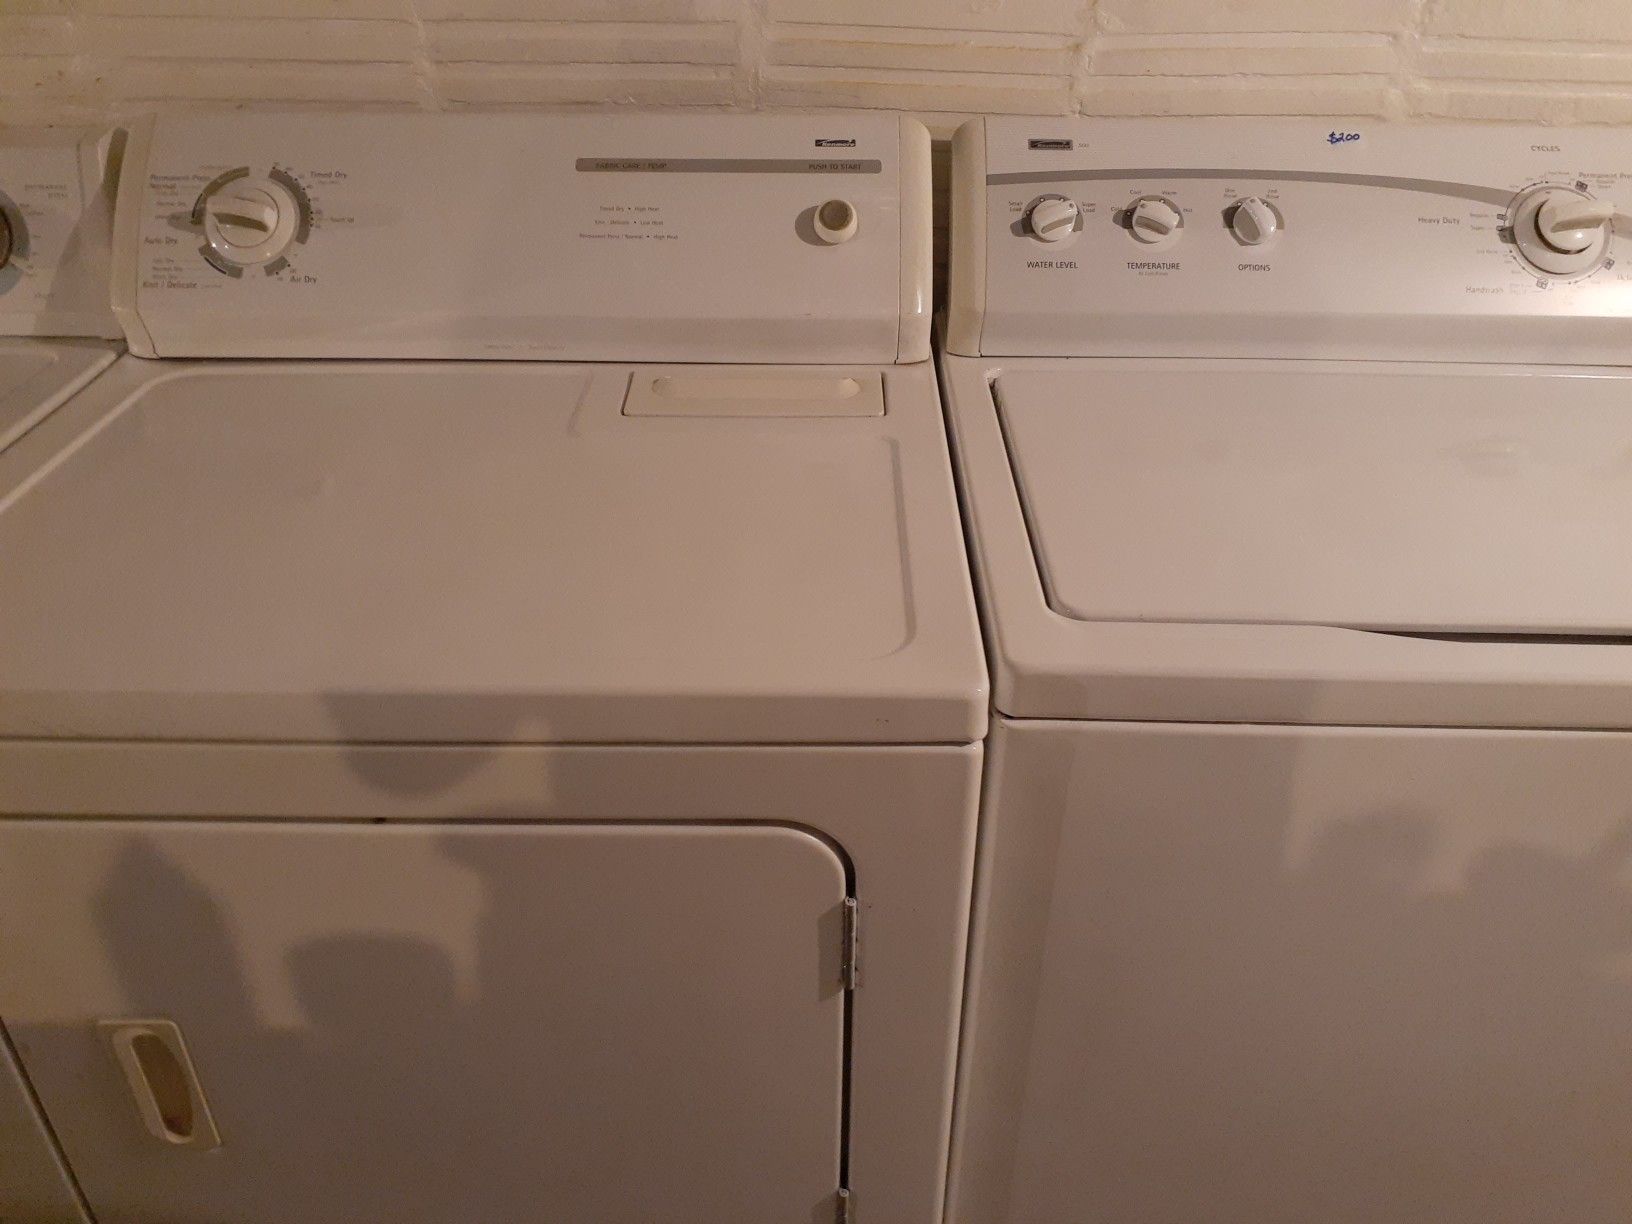 Nice all white Kenmore newer washer and dryer set